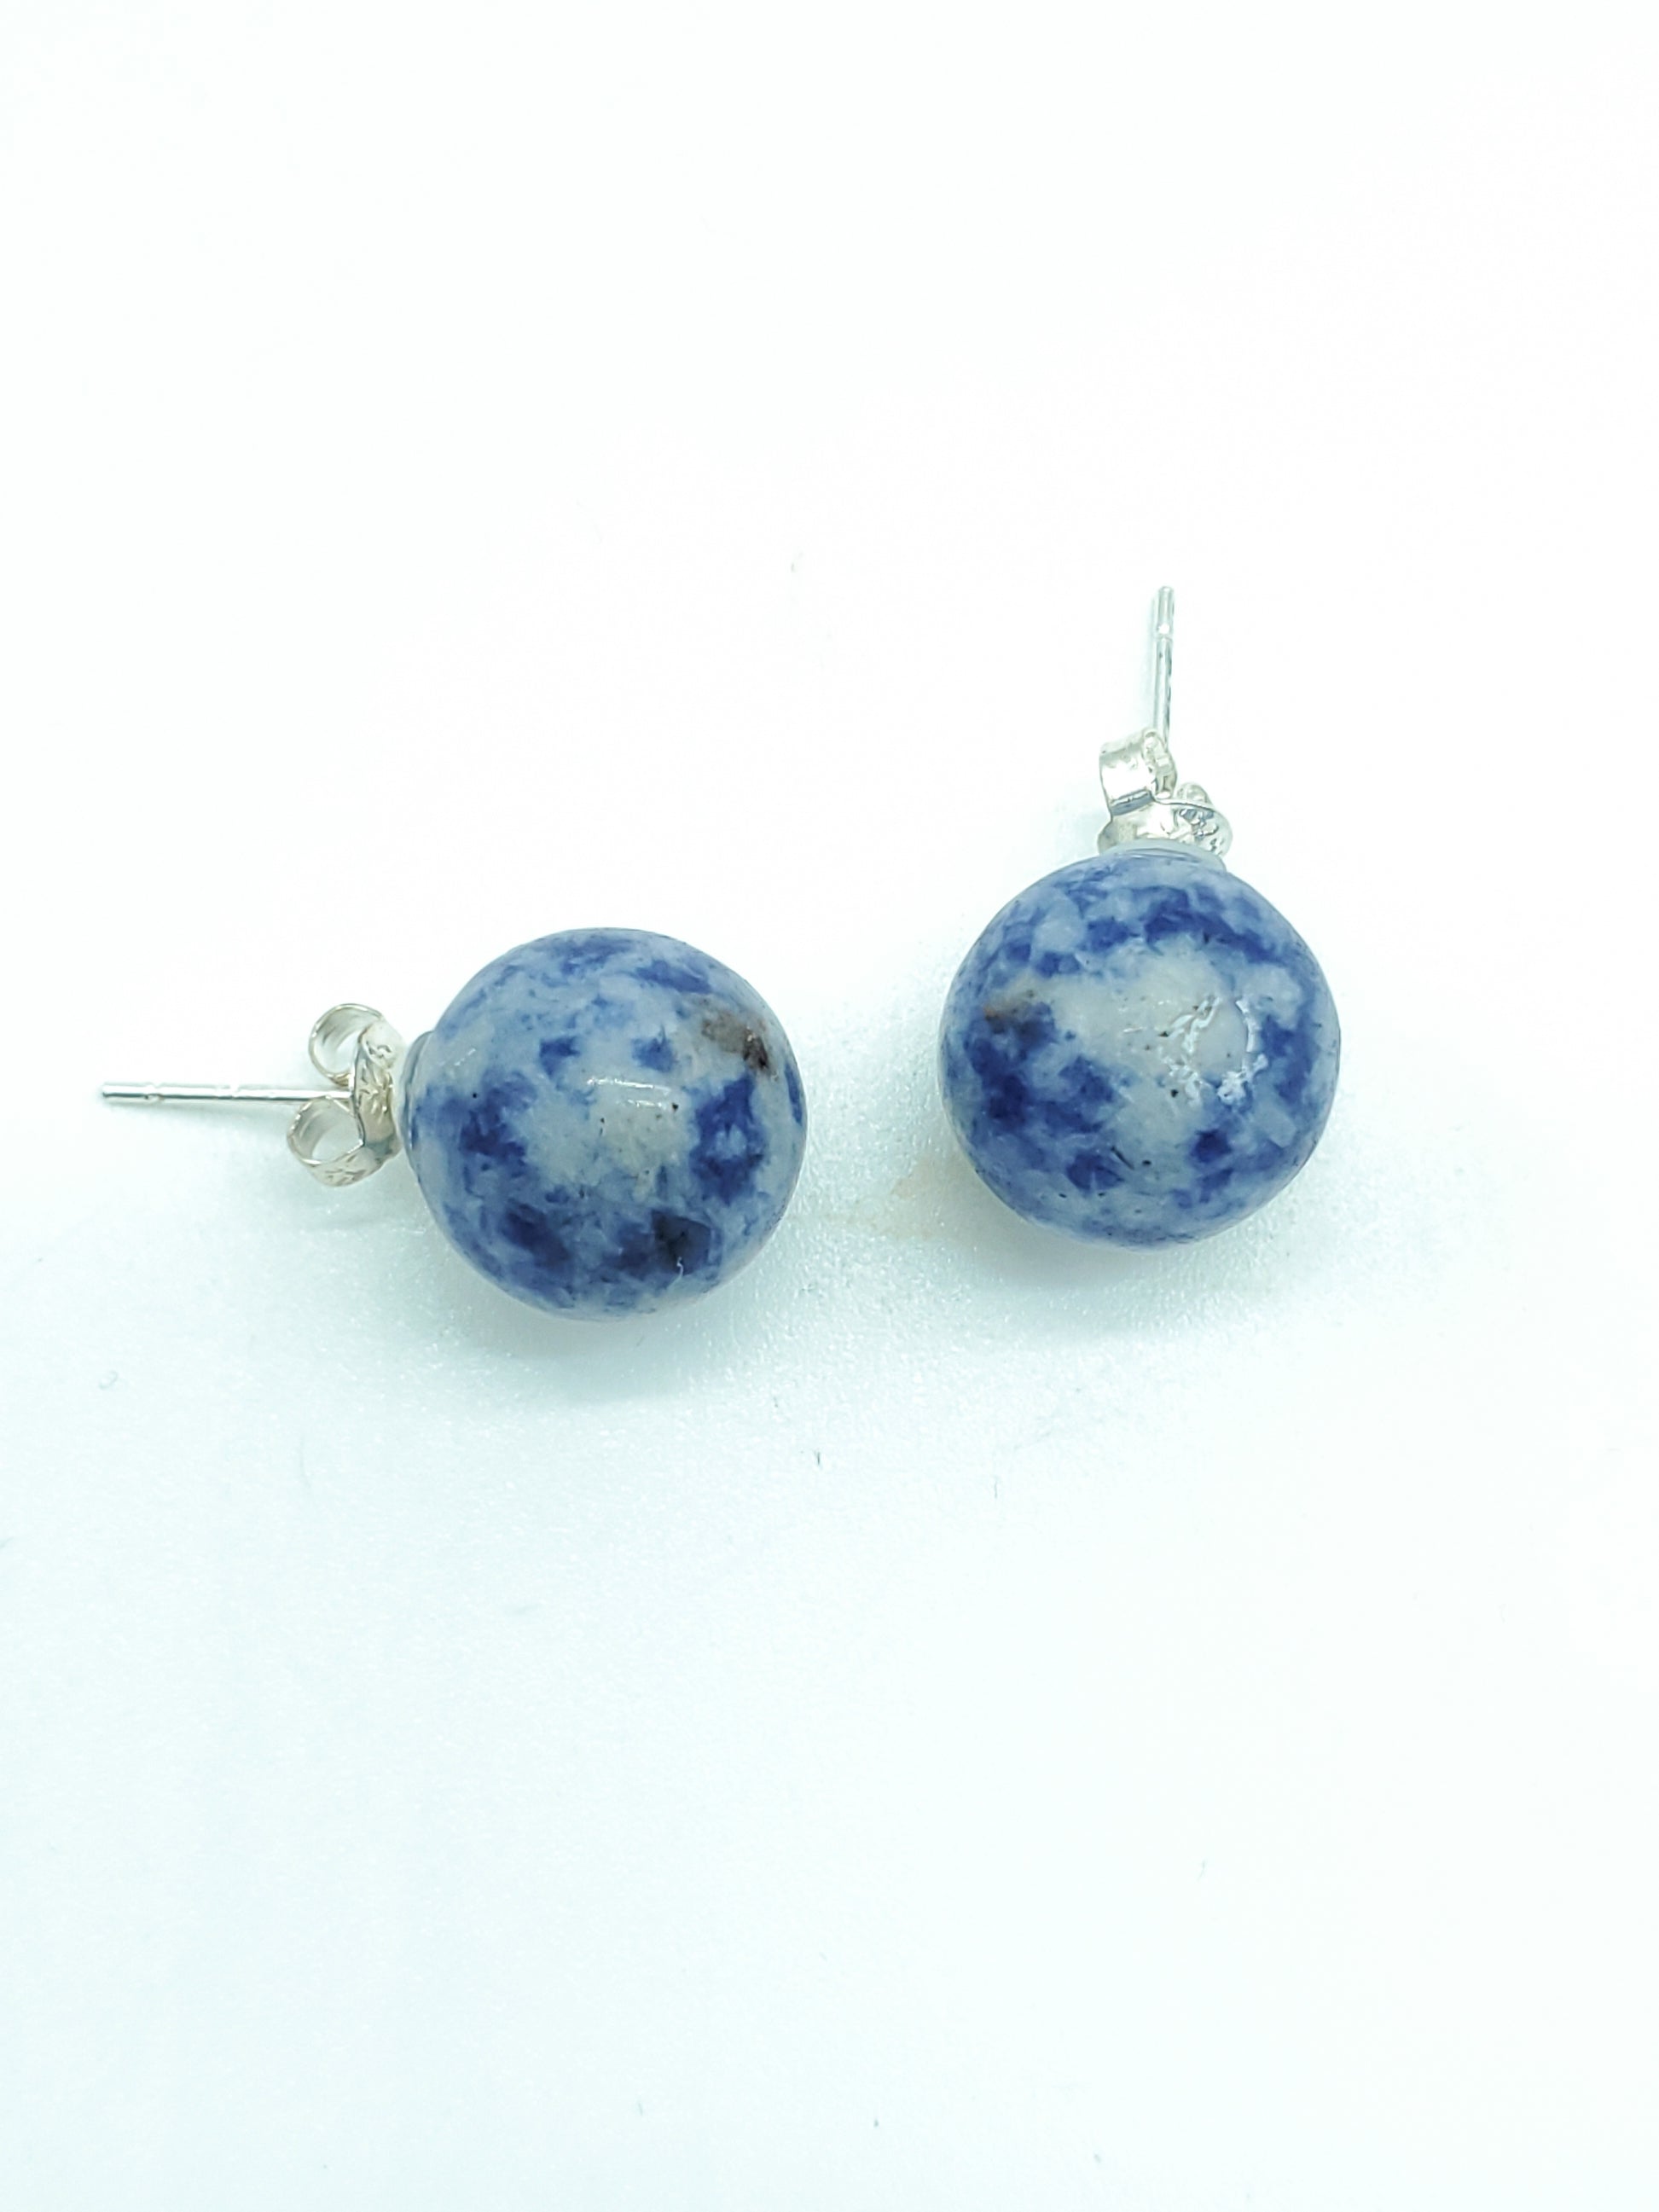 Sodalite Earrings on Sterling Silver Studs - The Caffeinated Raven